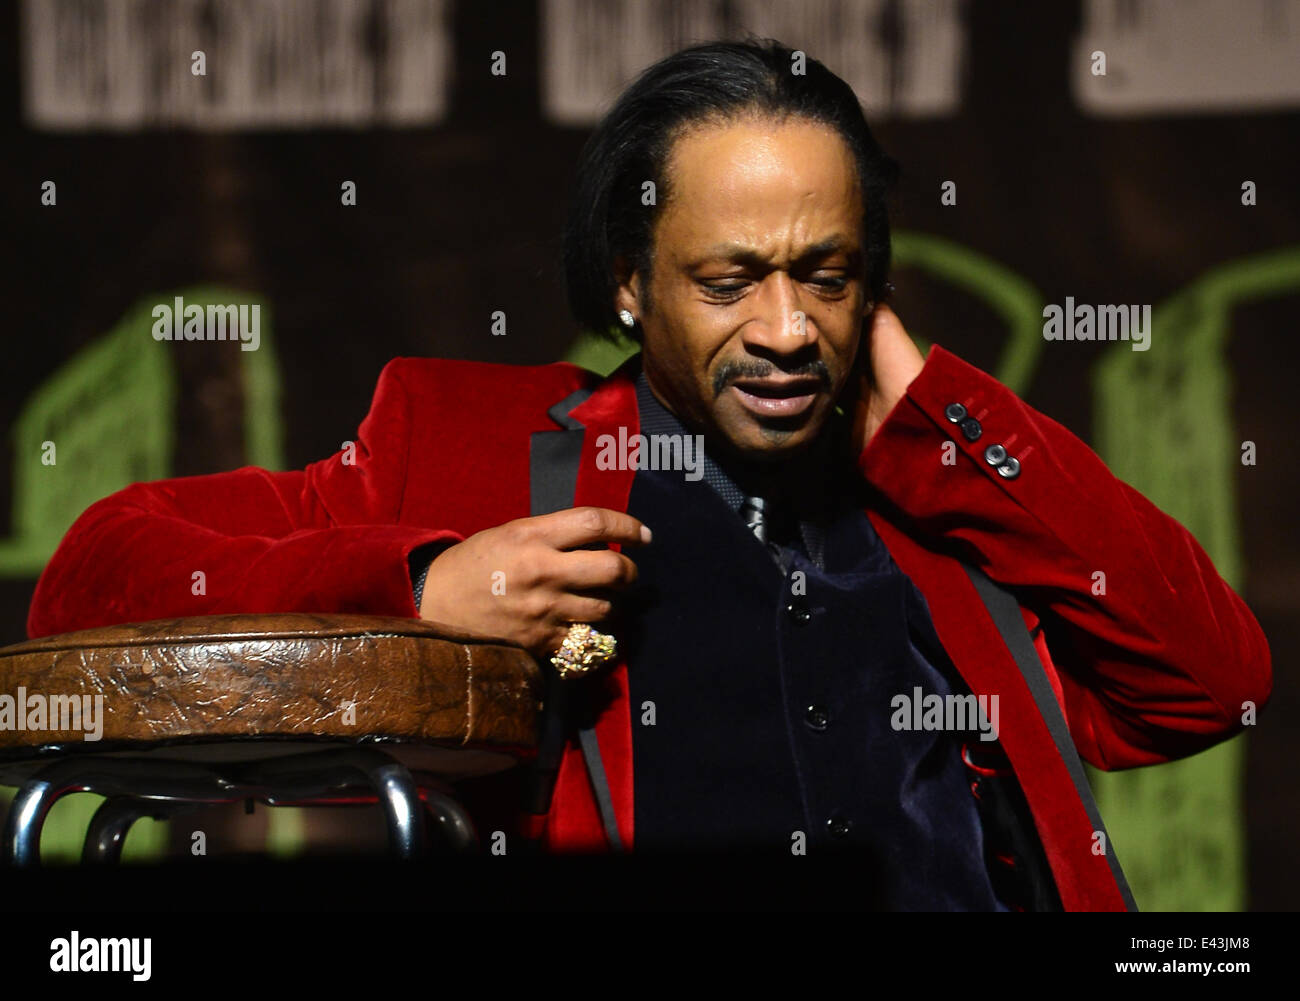 Katt Williams Growth Spurt comedy tour at the James L Knight Center  Featuring: Actor/comedian Katt Williams Where: Miami, Florida, United States When: 18 Jan 2014 Stock Photo